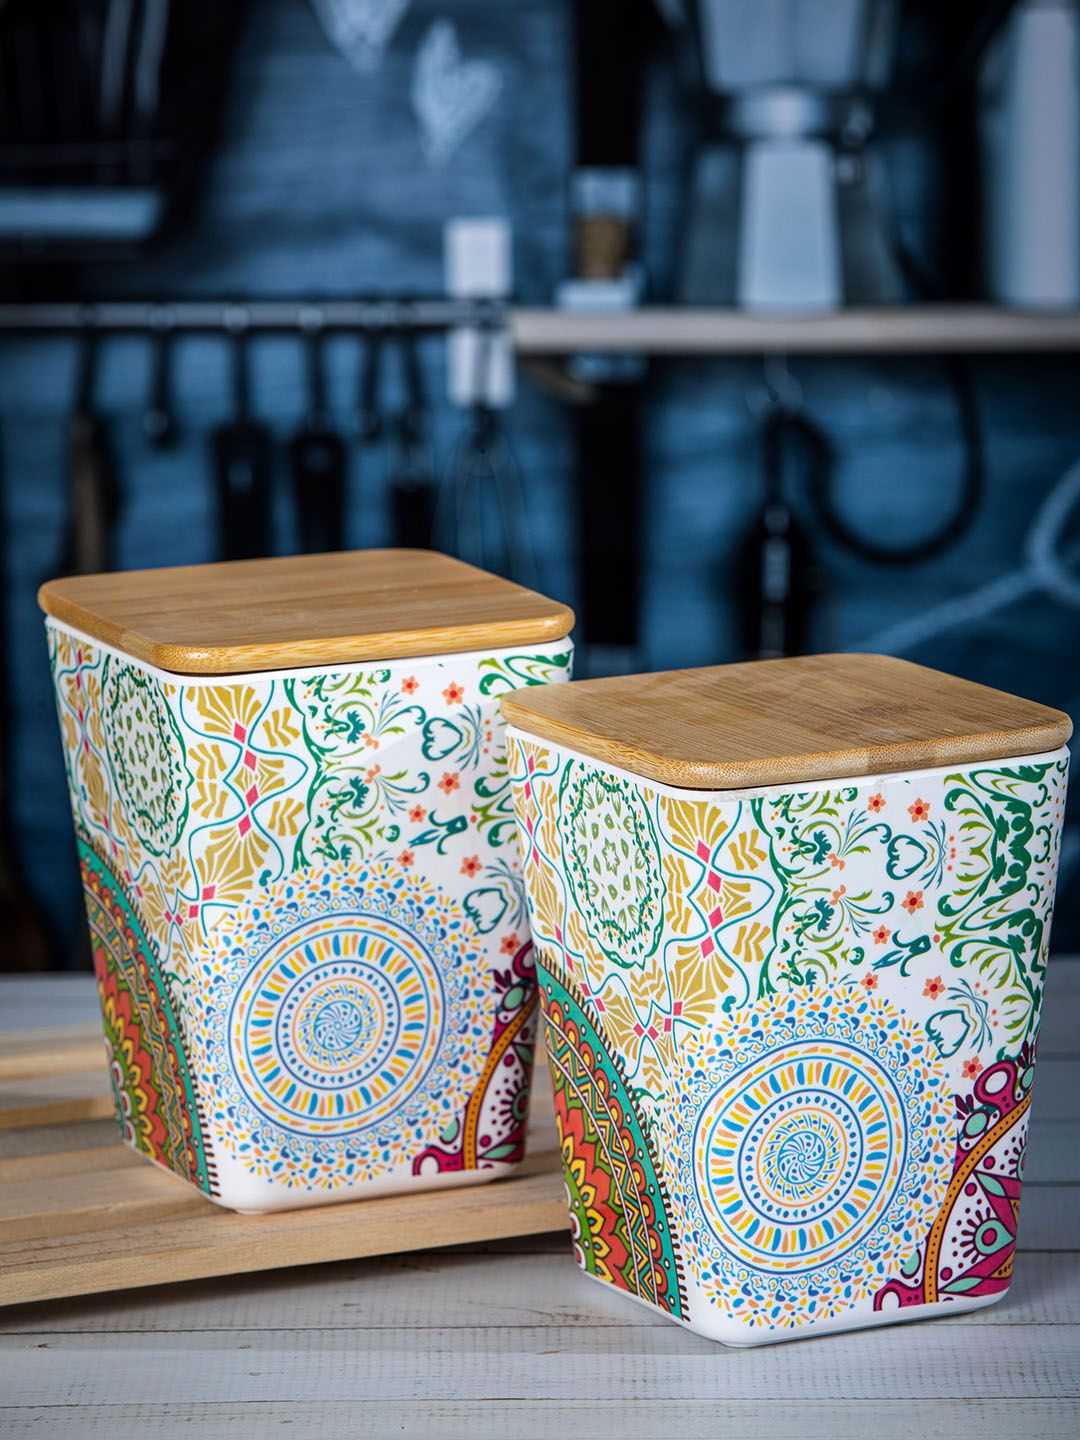 Stehlen Set Of 2 Multi-Colored Canister With Wooden Lid Price in India